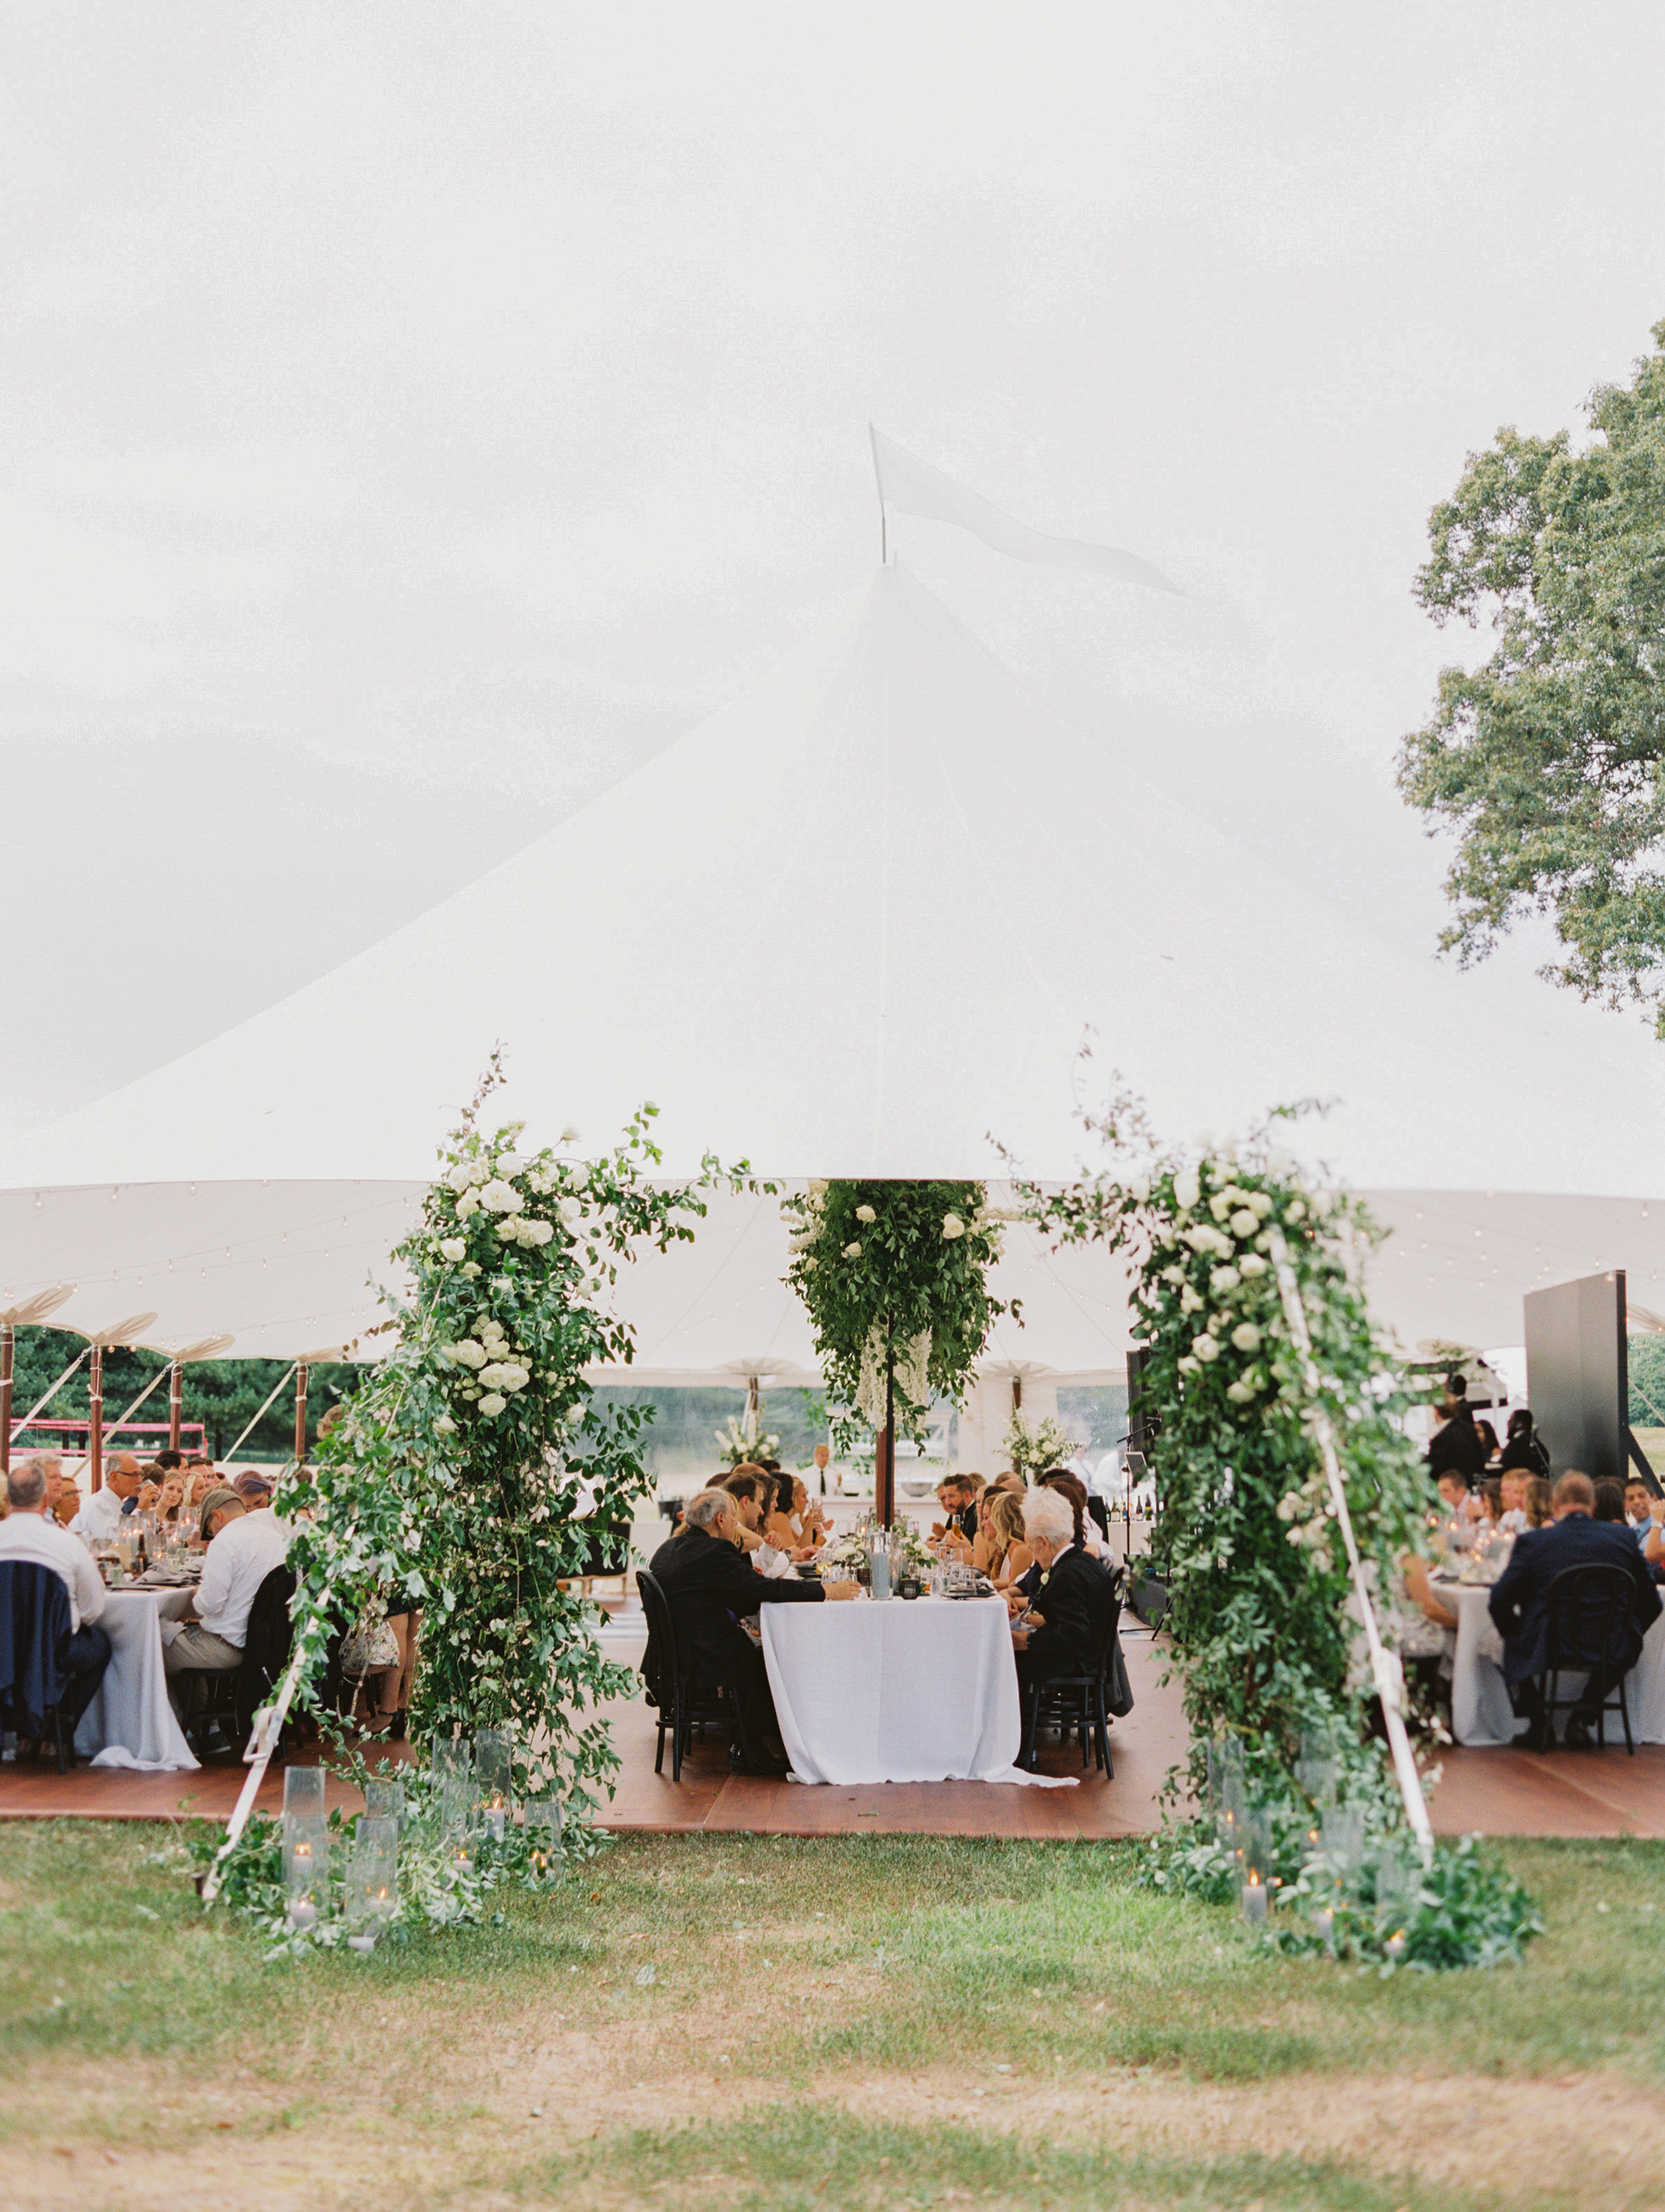 Wedding Reception Tent at Wye River Estate on Maryland's Eastern Shore